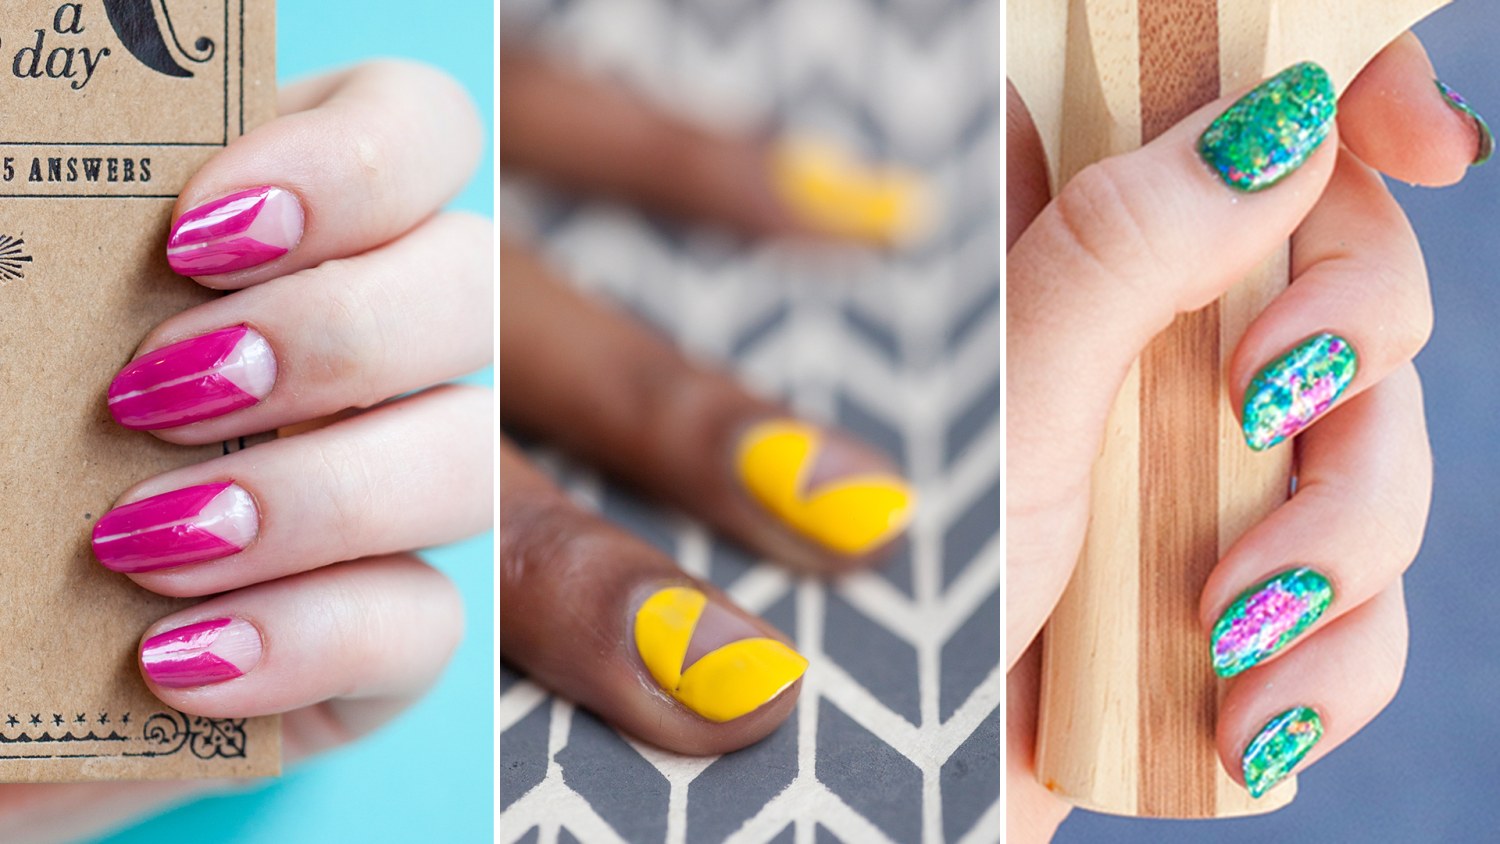 Nail art 2017: Trends, tutorials, tips to try now